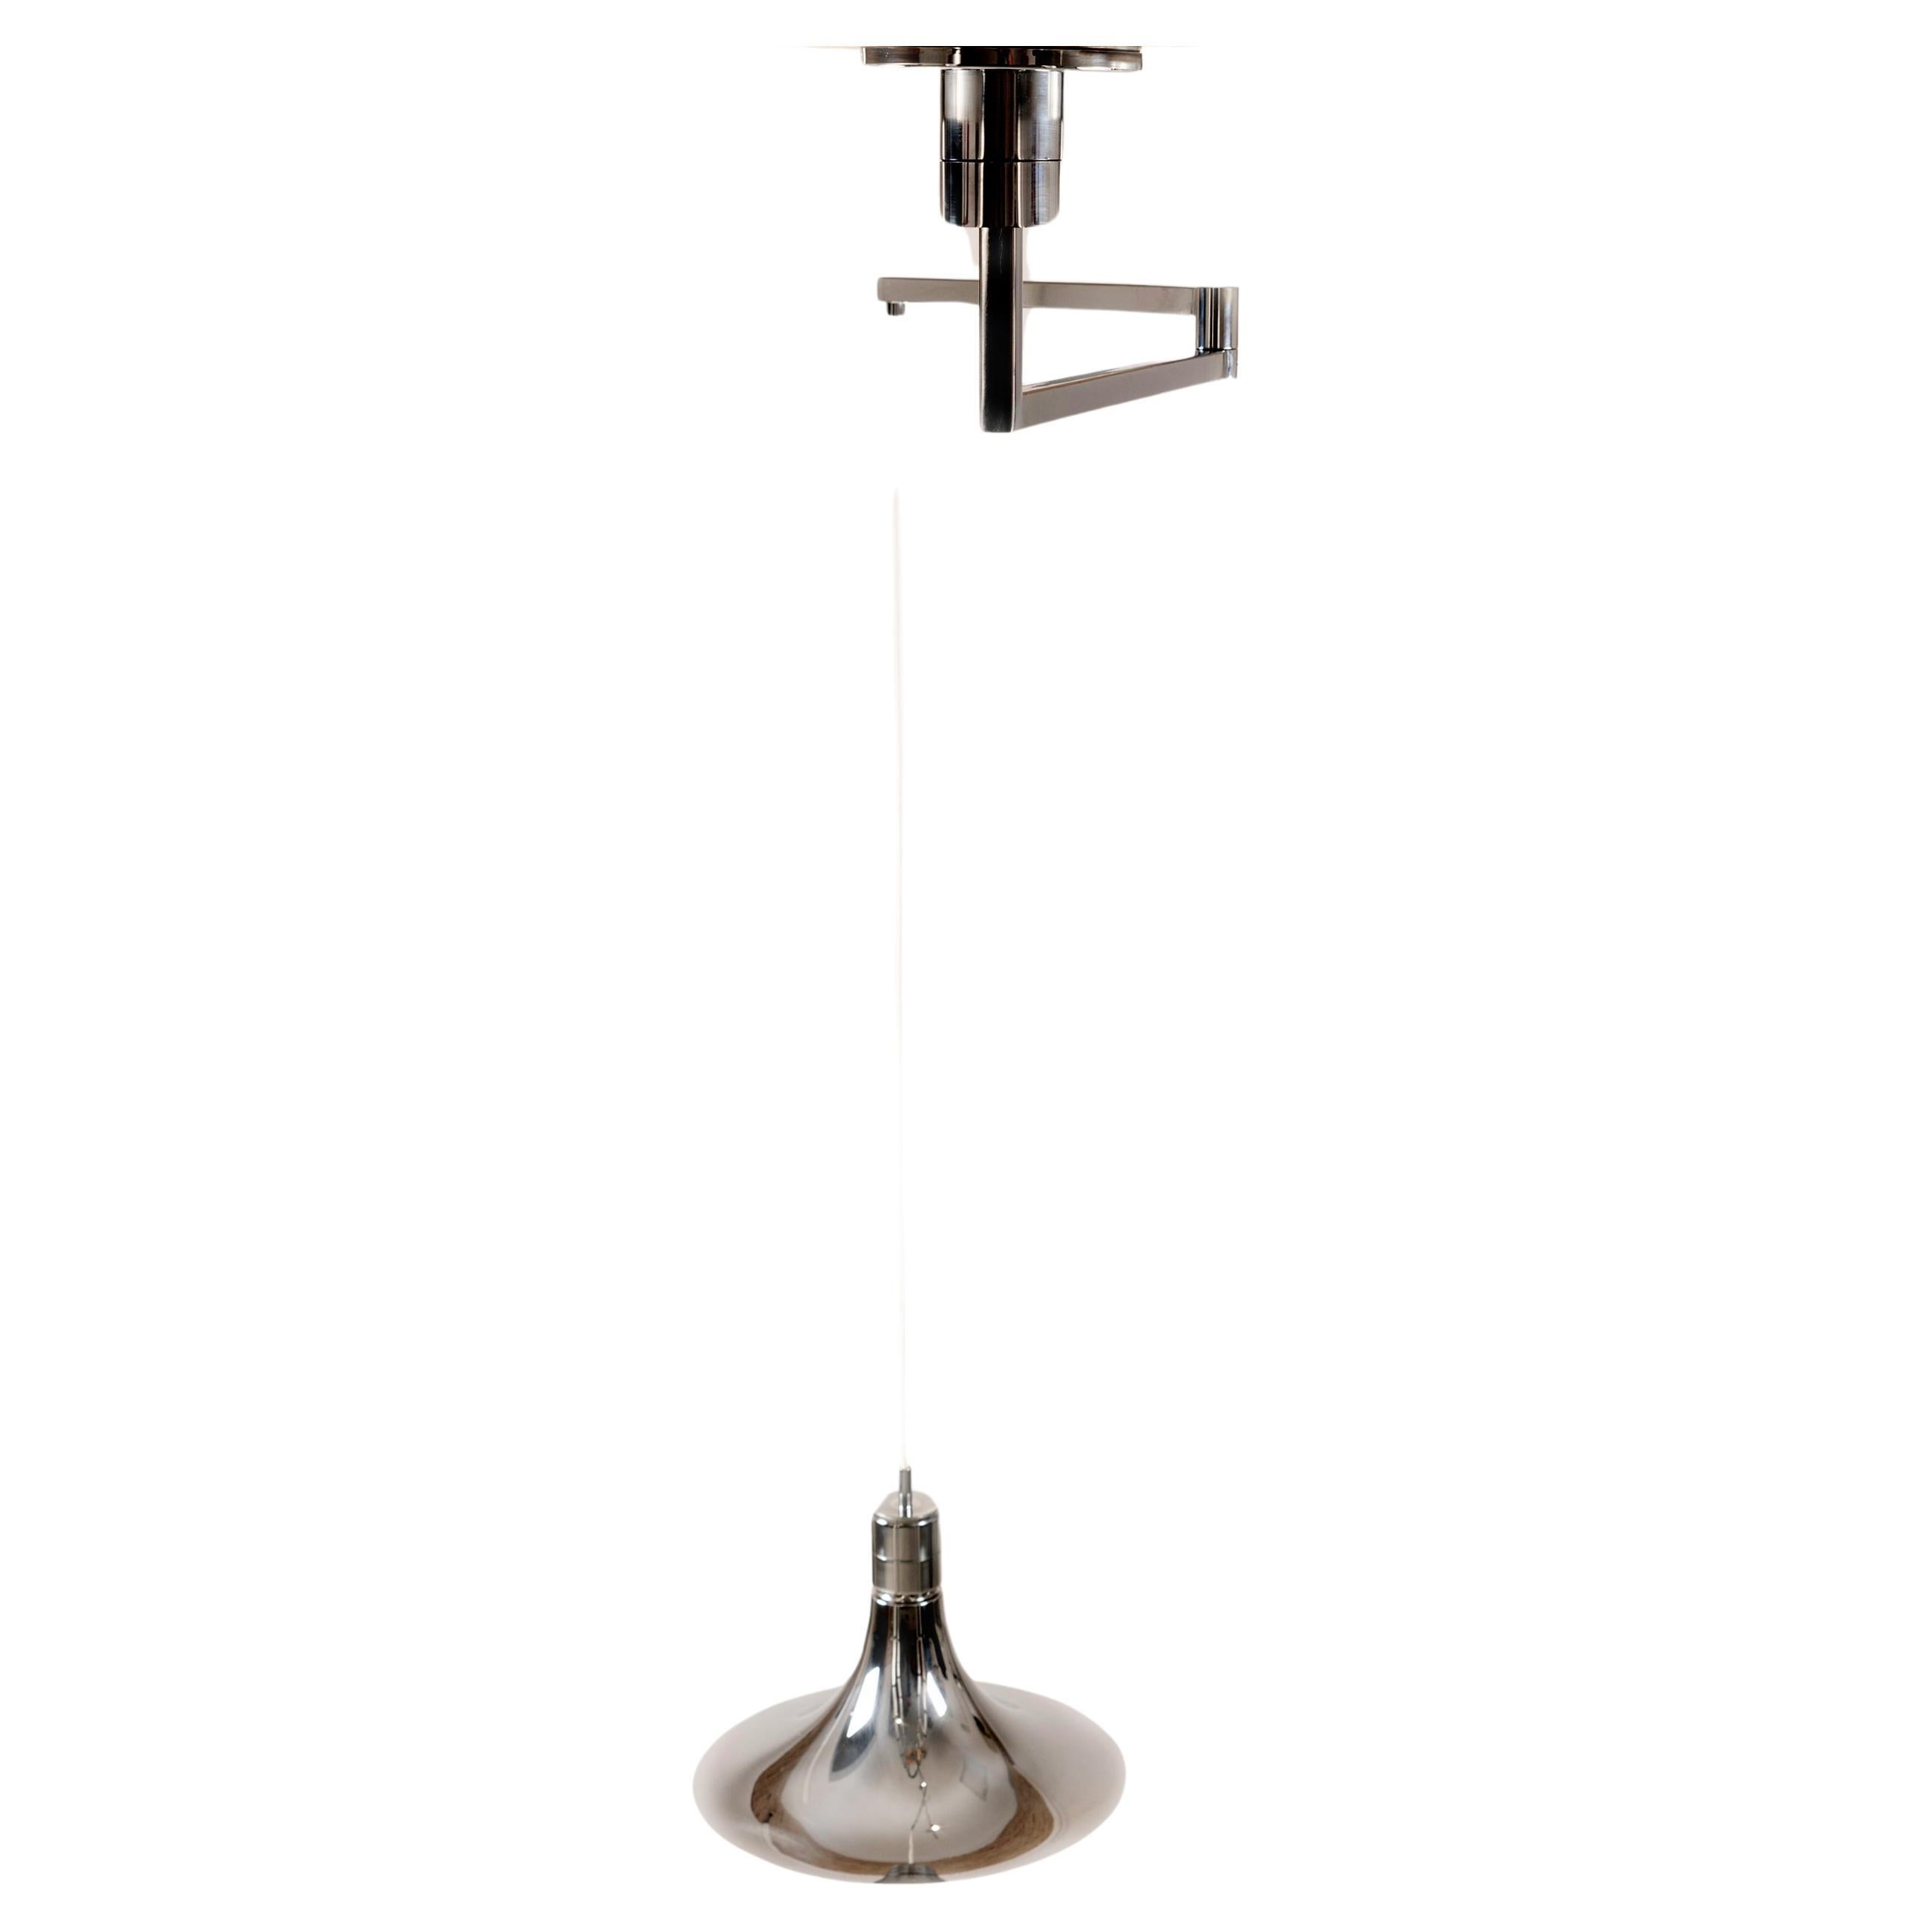 AM/AS Ceiling Lamp with Chromed Swing Arm by Franco Albini for Sirrah, 1960s For Sale